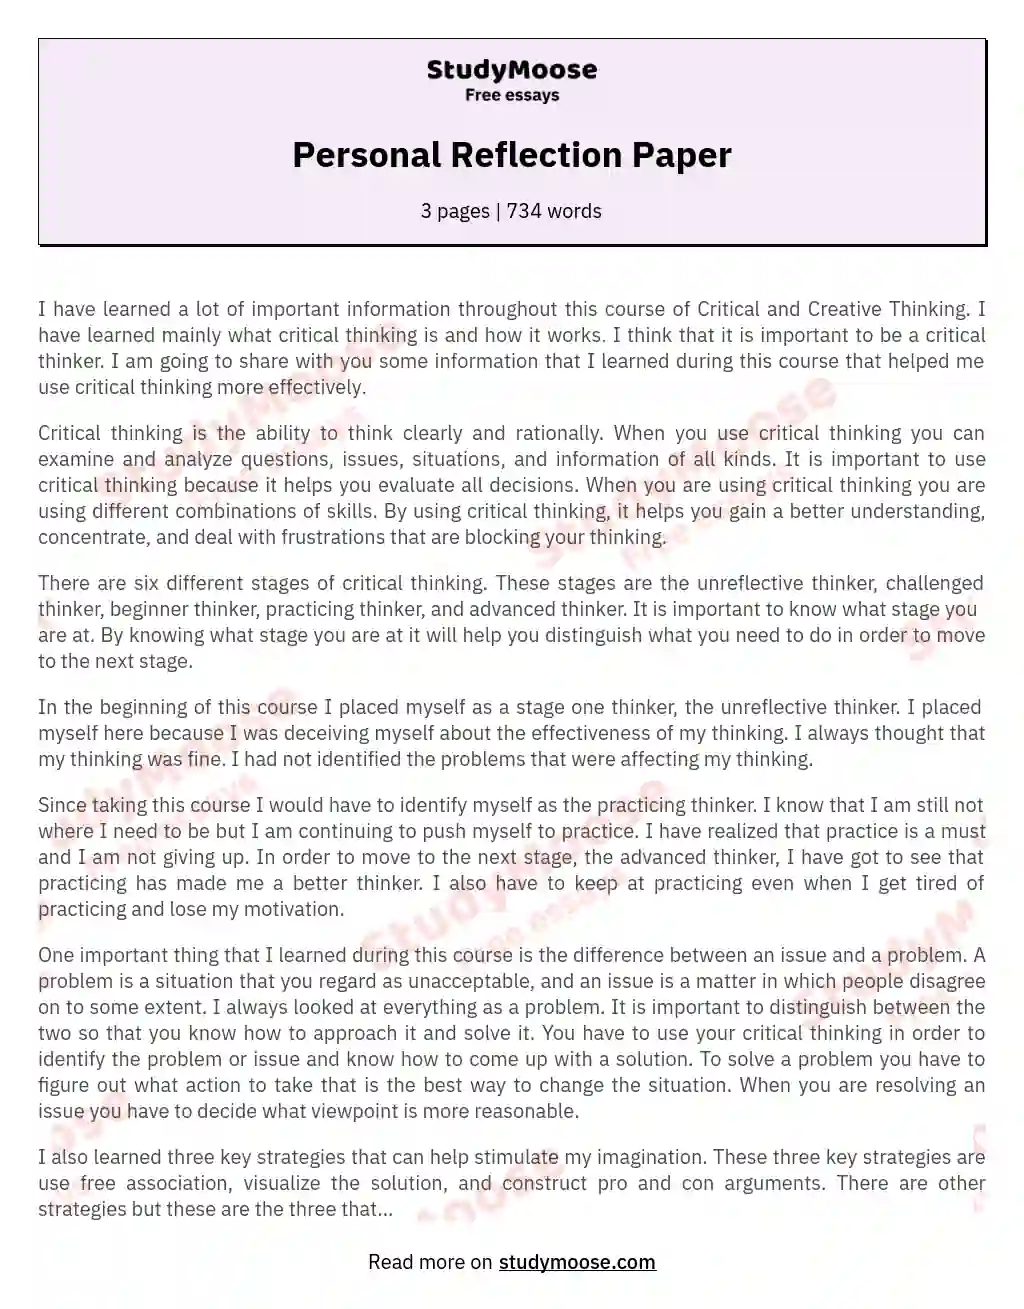 Personal Reflection Paper essay